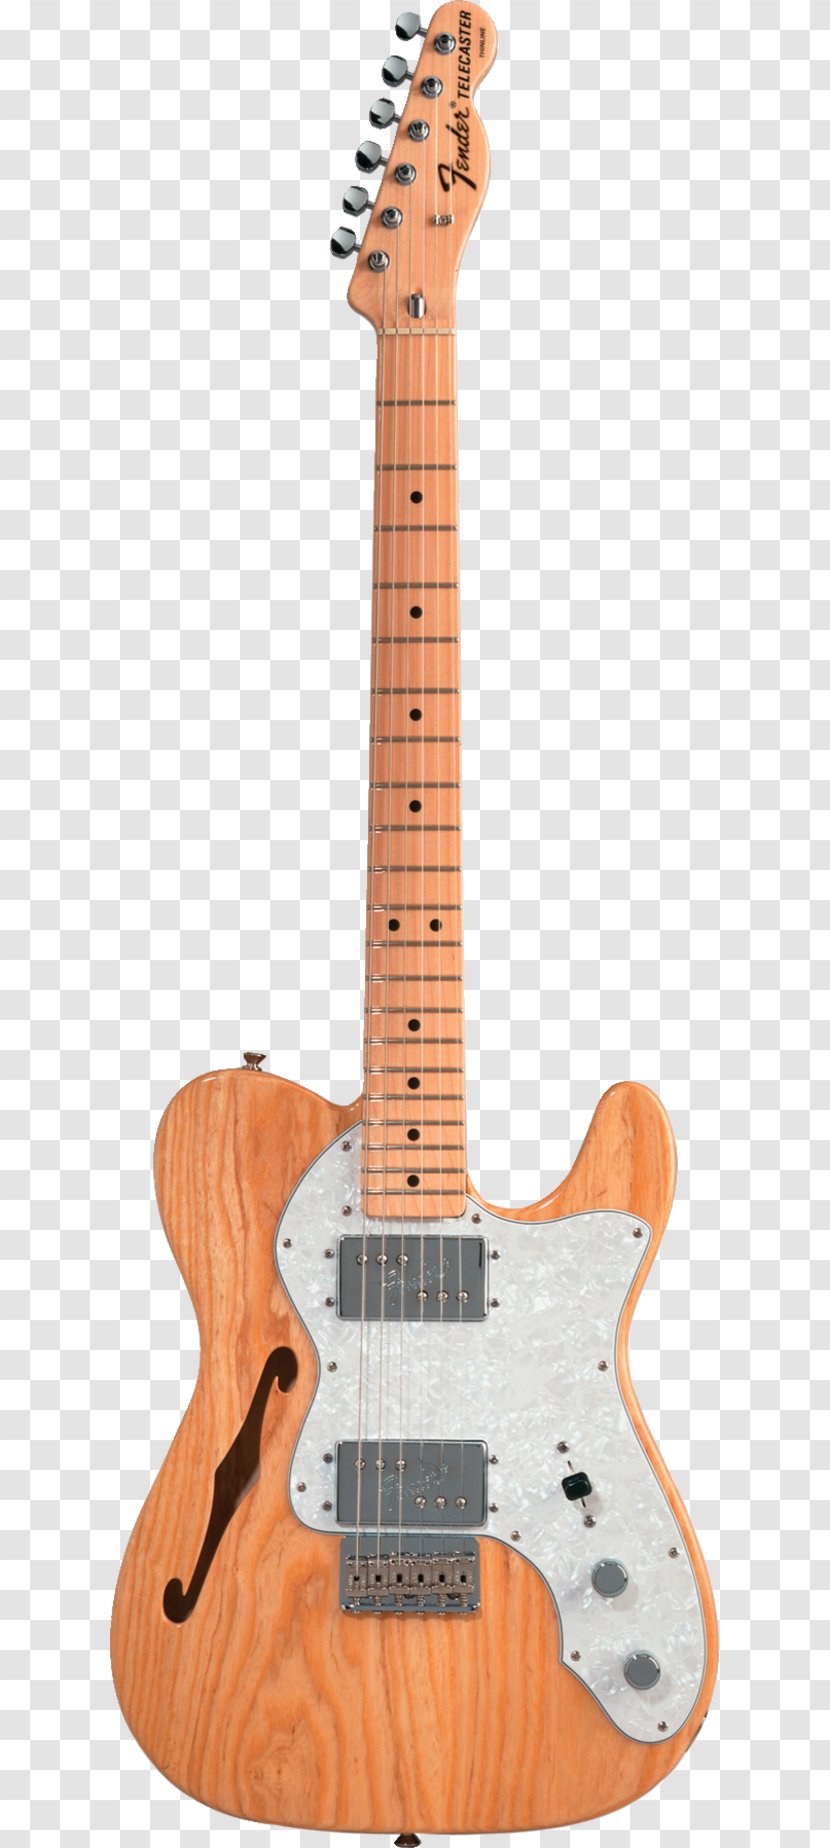 Fender Telecaster Thinline Classic Series '72 Musical Instruments Corporation Guitar - Deluxe Transparent PNG